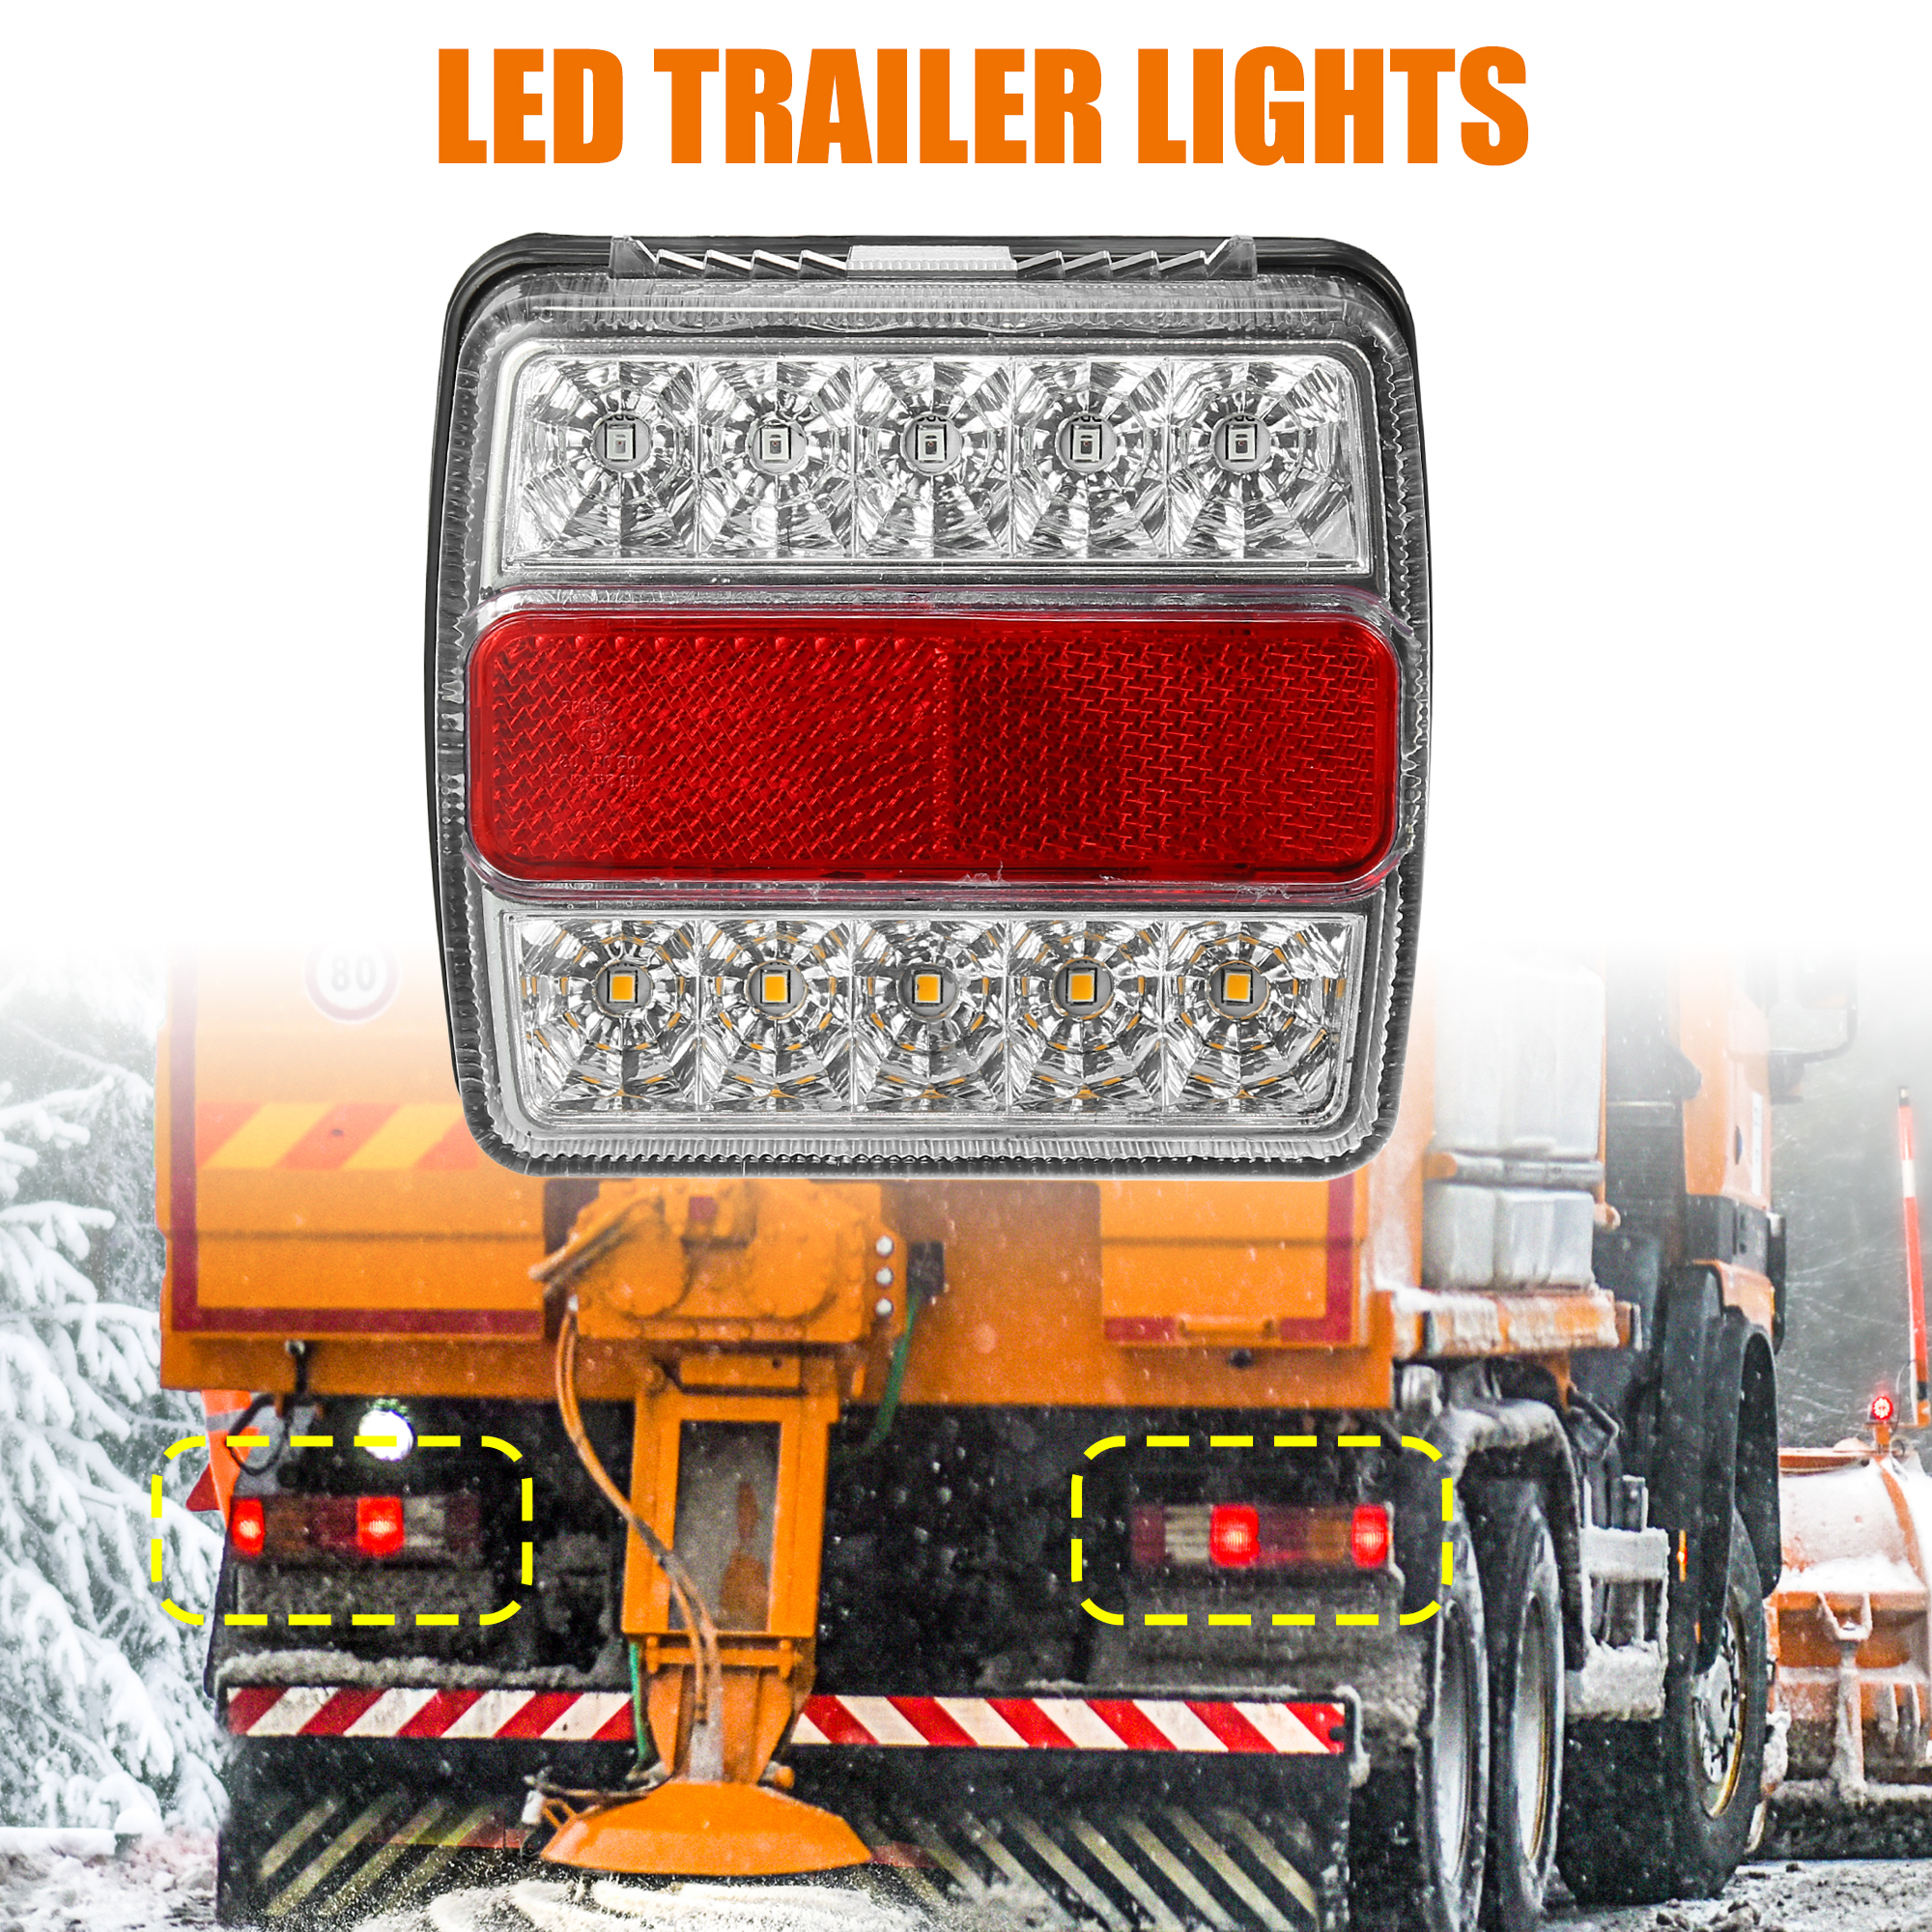 Unique Bargains 2pcs Left 16 Right 10 LED White Car Trailer Lights with Plug Red White Amber